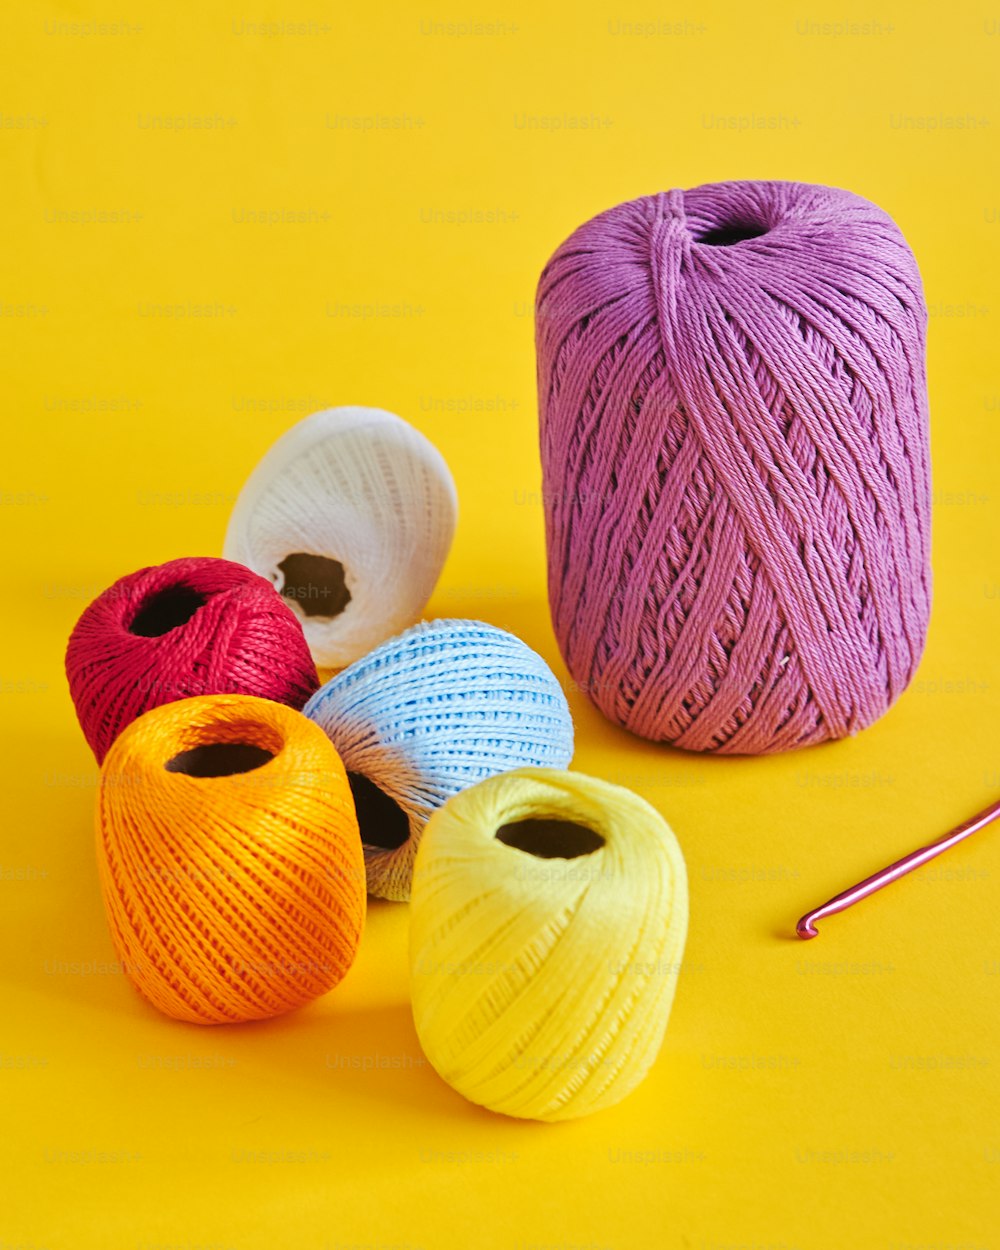 a group of balls of yarn next to a crochet hook